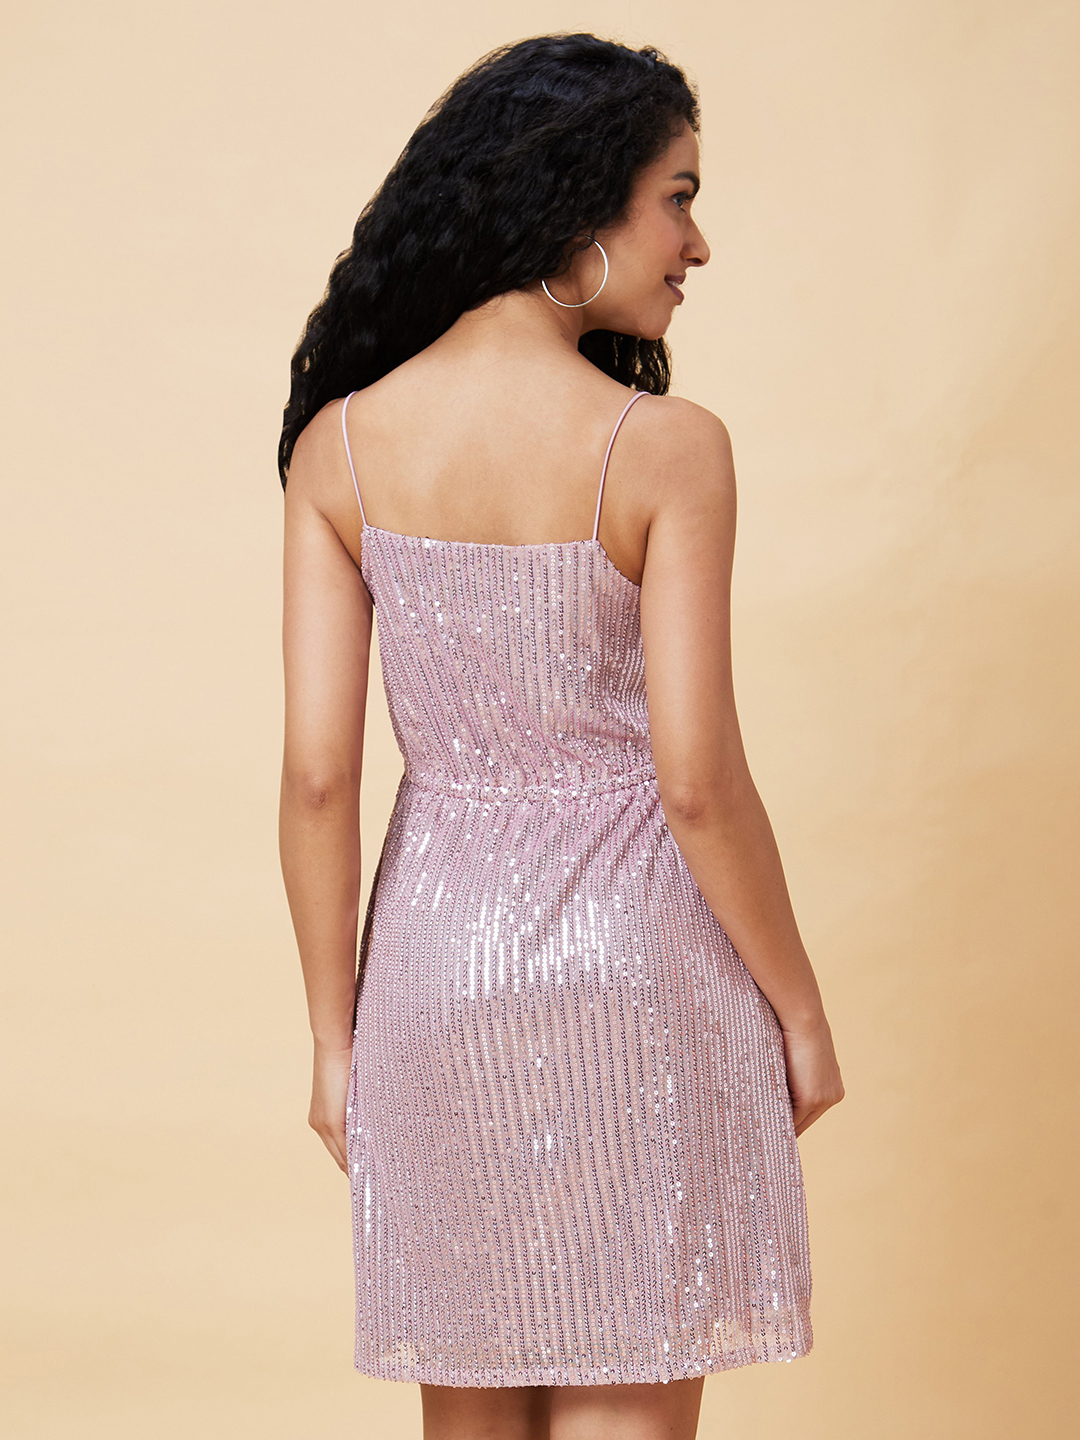 Globus Women Mauve Sequined Embellished Strappy Party Bodycon Dress